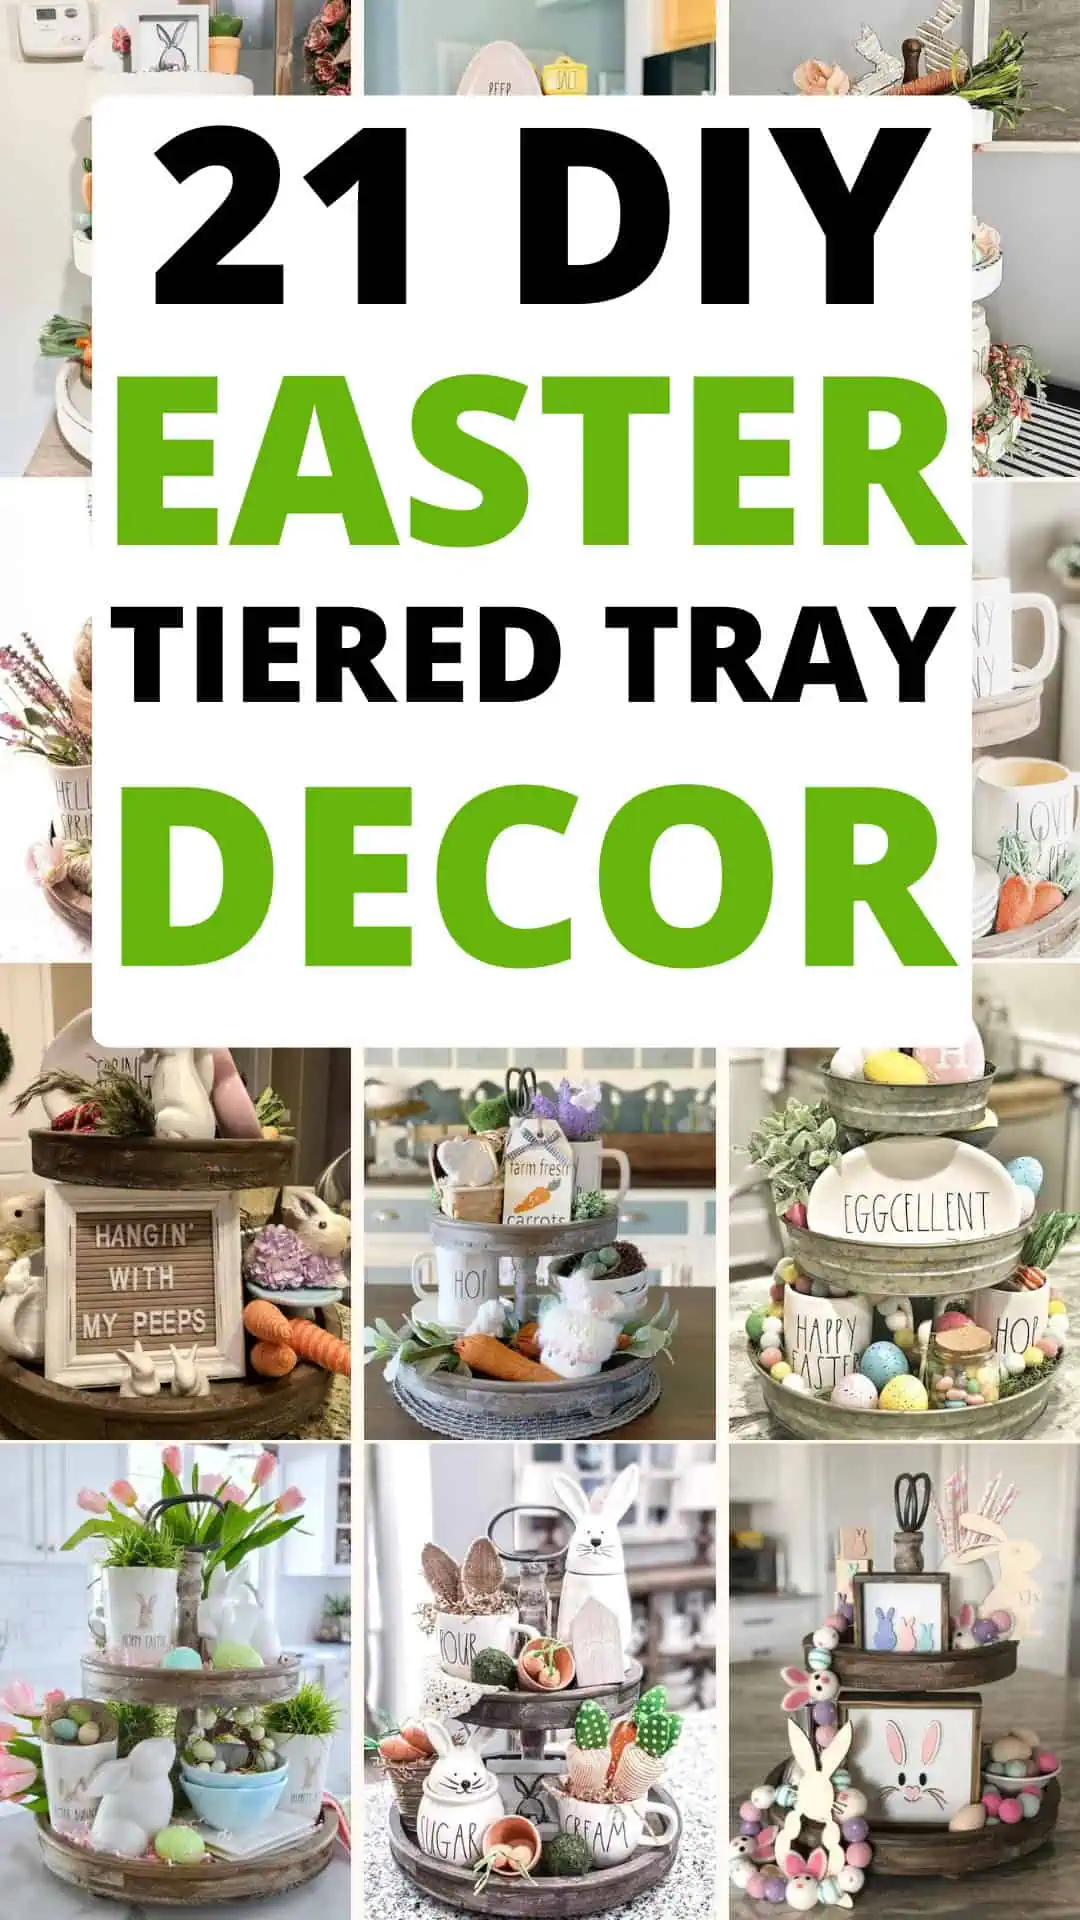 DIY Easter Tiered Tray Decor Ideas